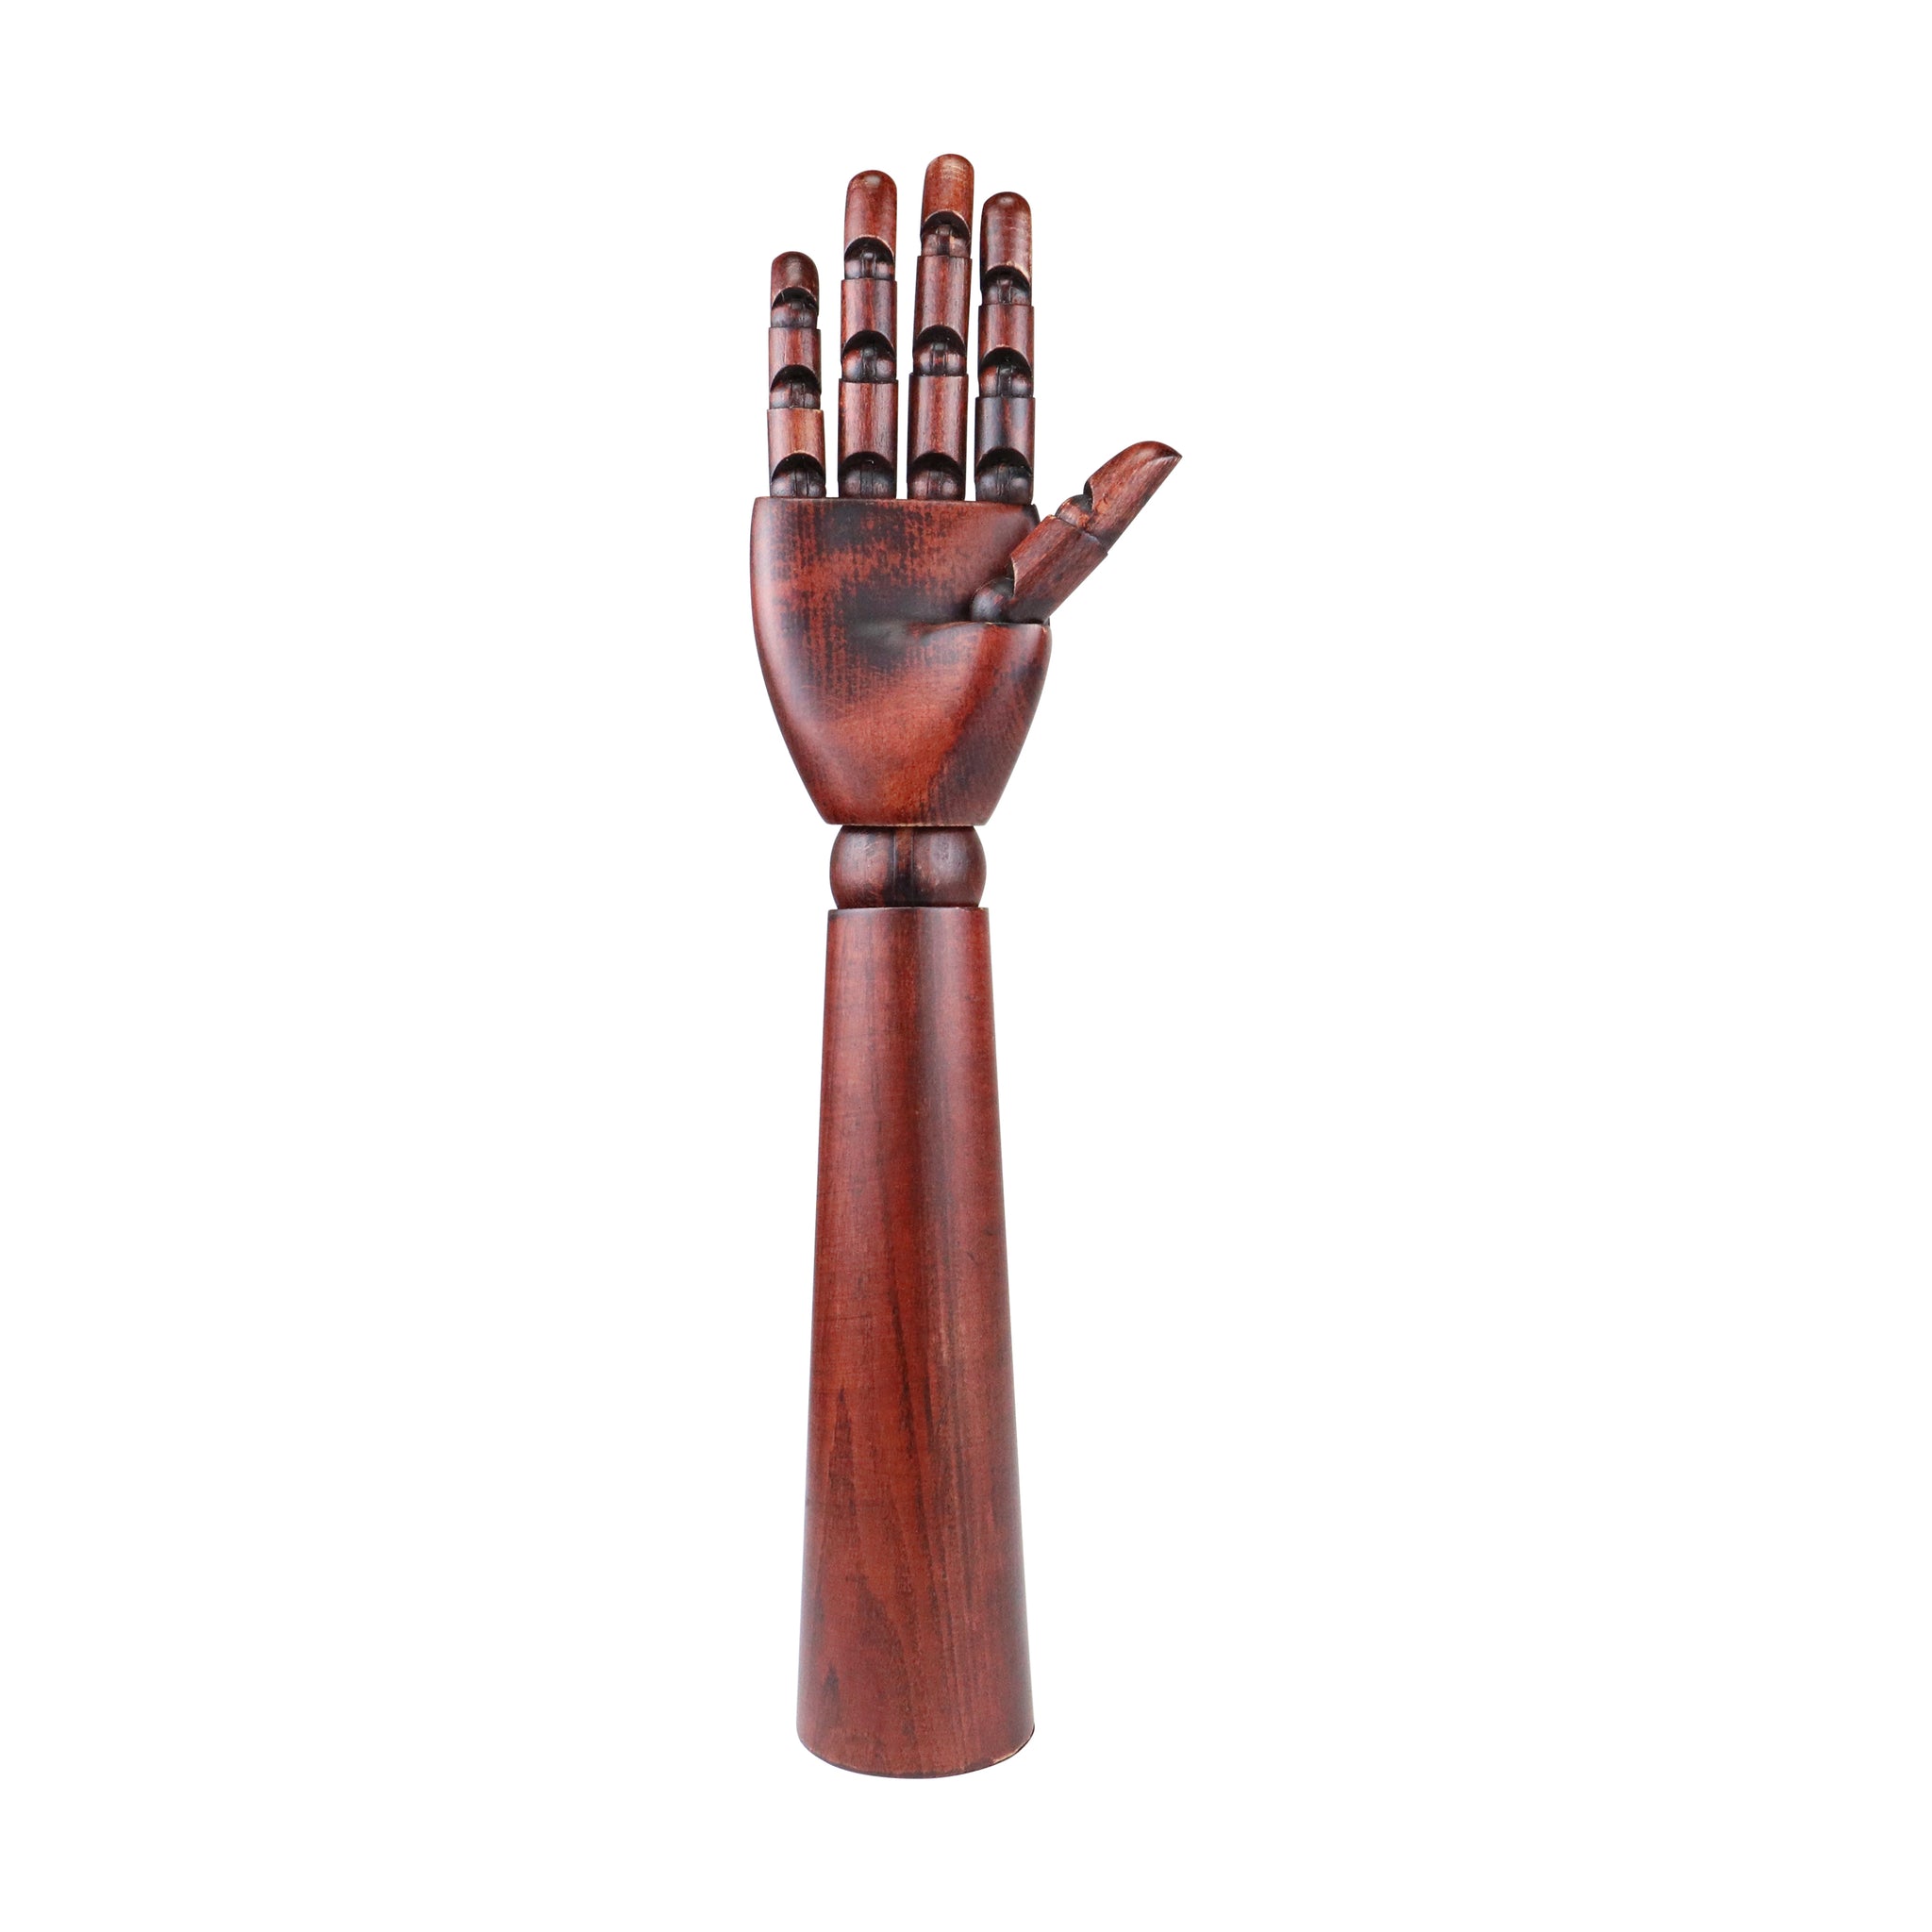 Wooden Hand Model, 7 Art Mannequin Figure with Posable Fingers